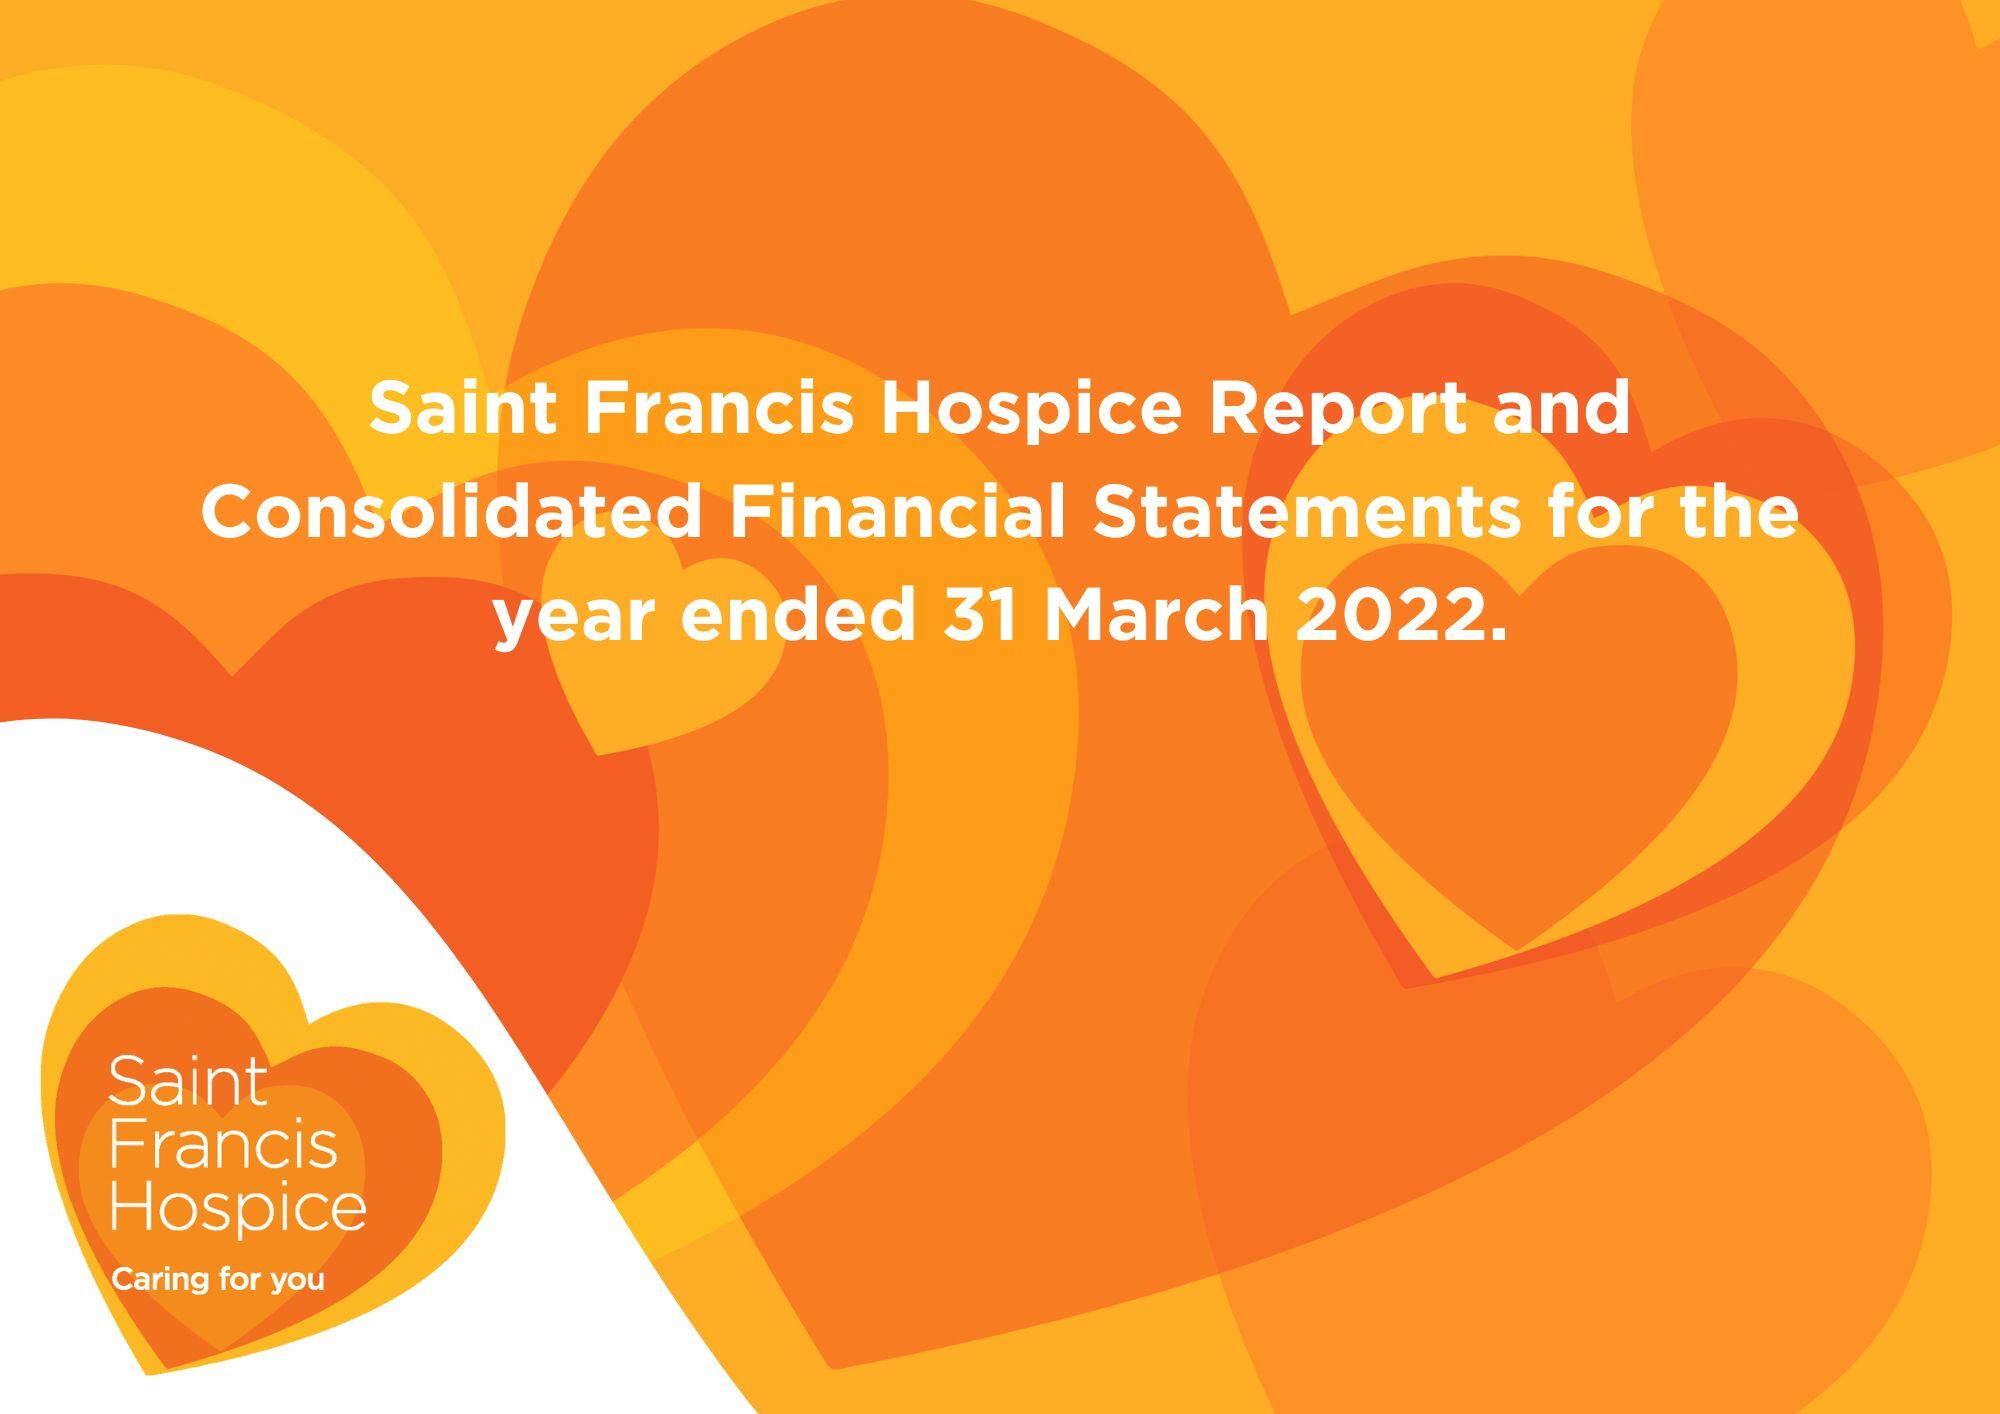 Saint Francis Hospice Report and Consolidated Financial Statements for the year ended 31 March 2022.